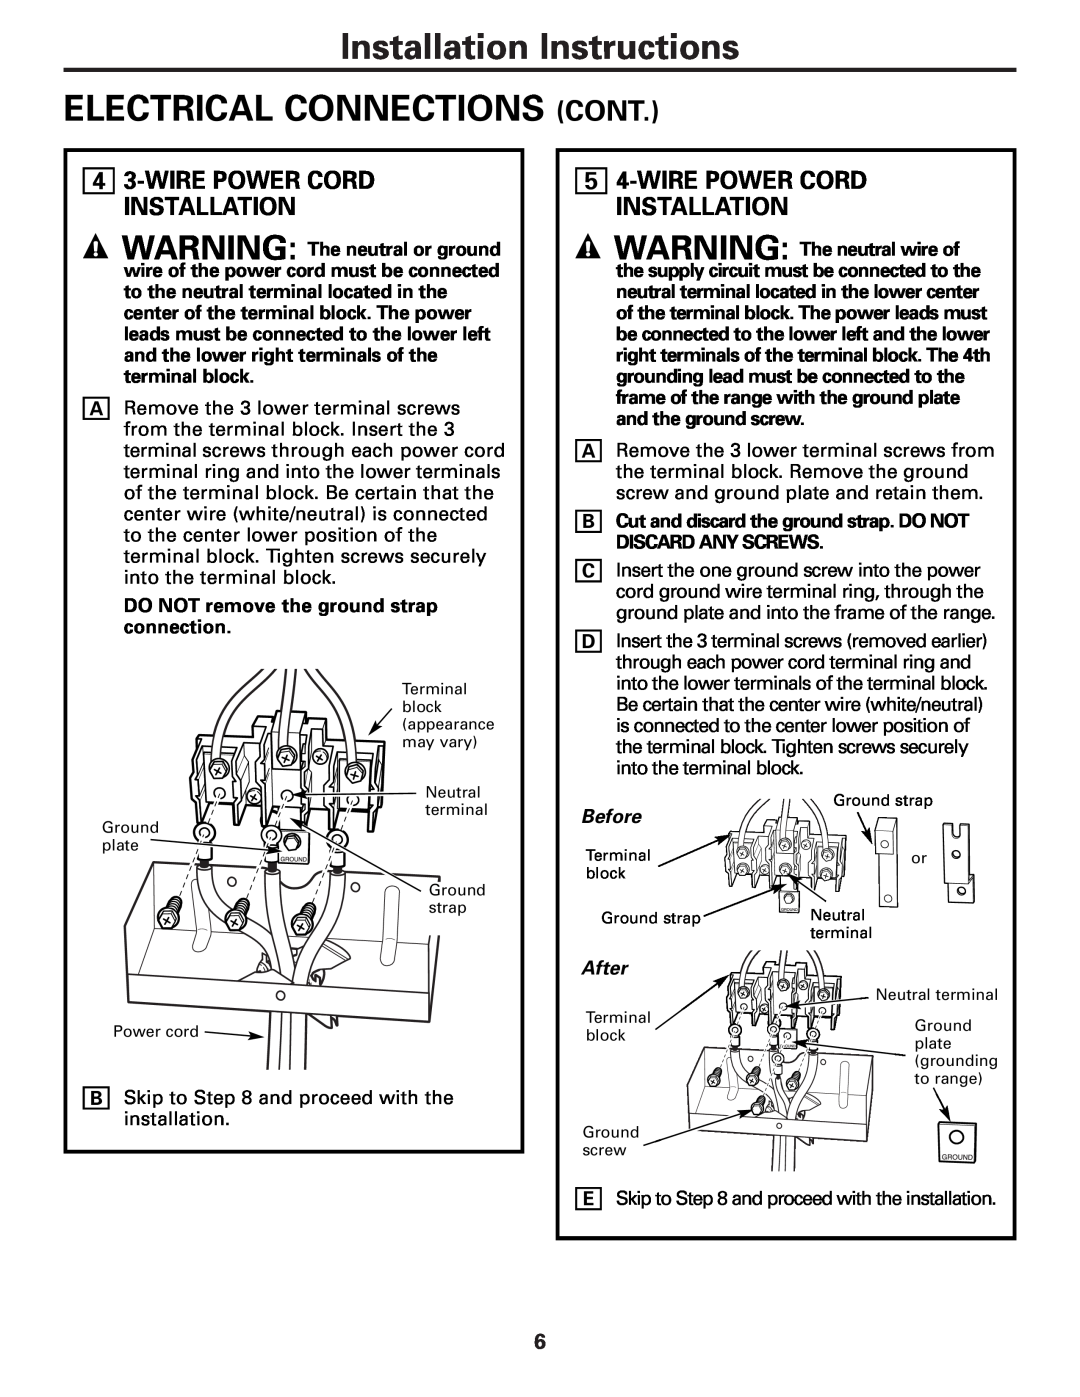 GE PB975, PB970 Installation Instructions ELECTRICAL CONNECTIONS CONT, 4 3-WIRE POWER CORD INSTALLATION, Before, After 